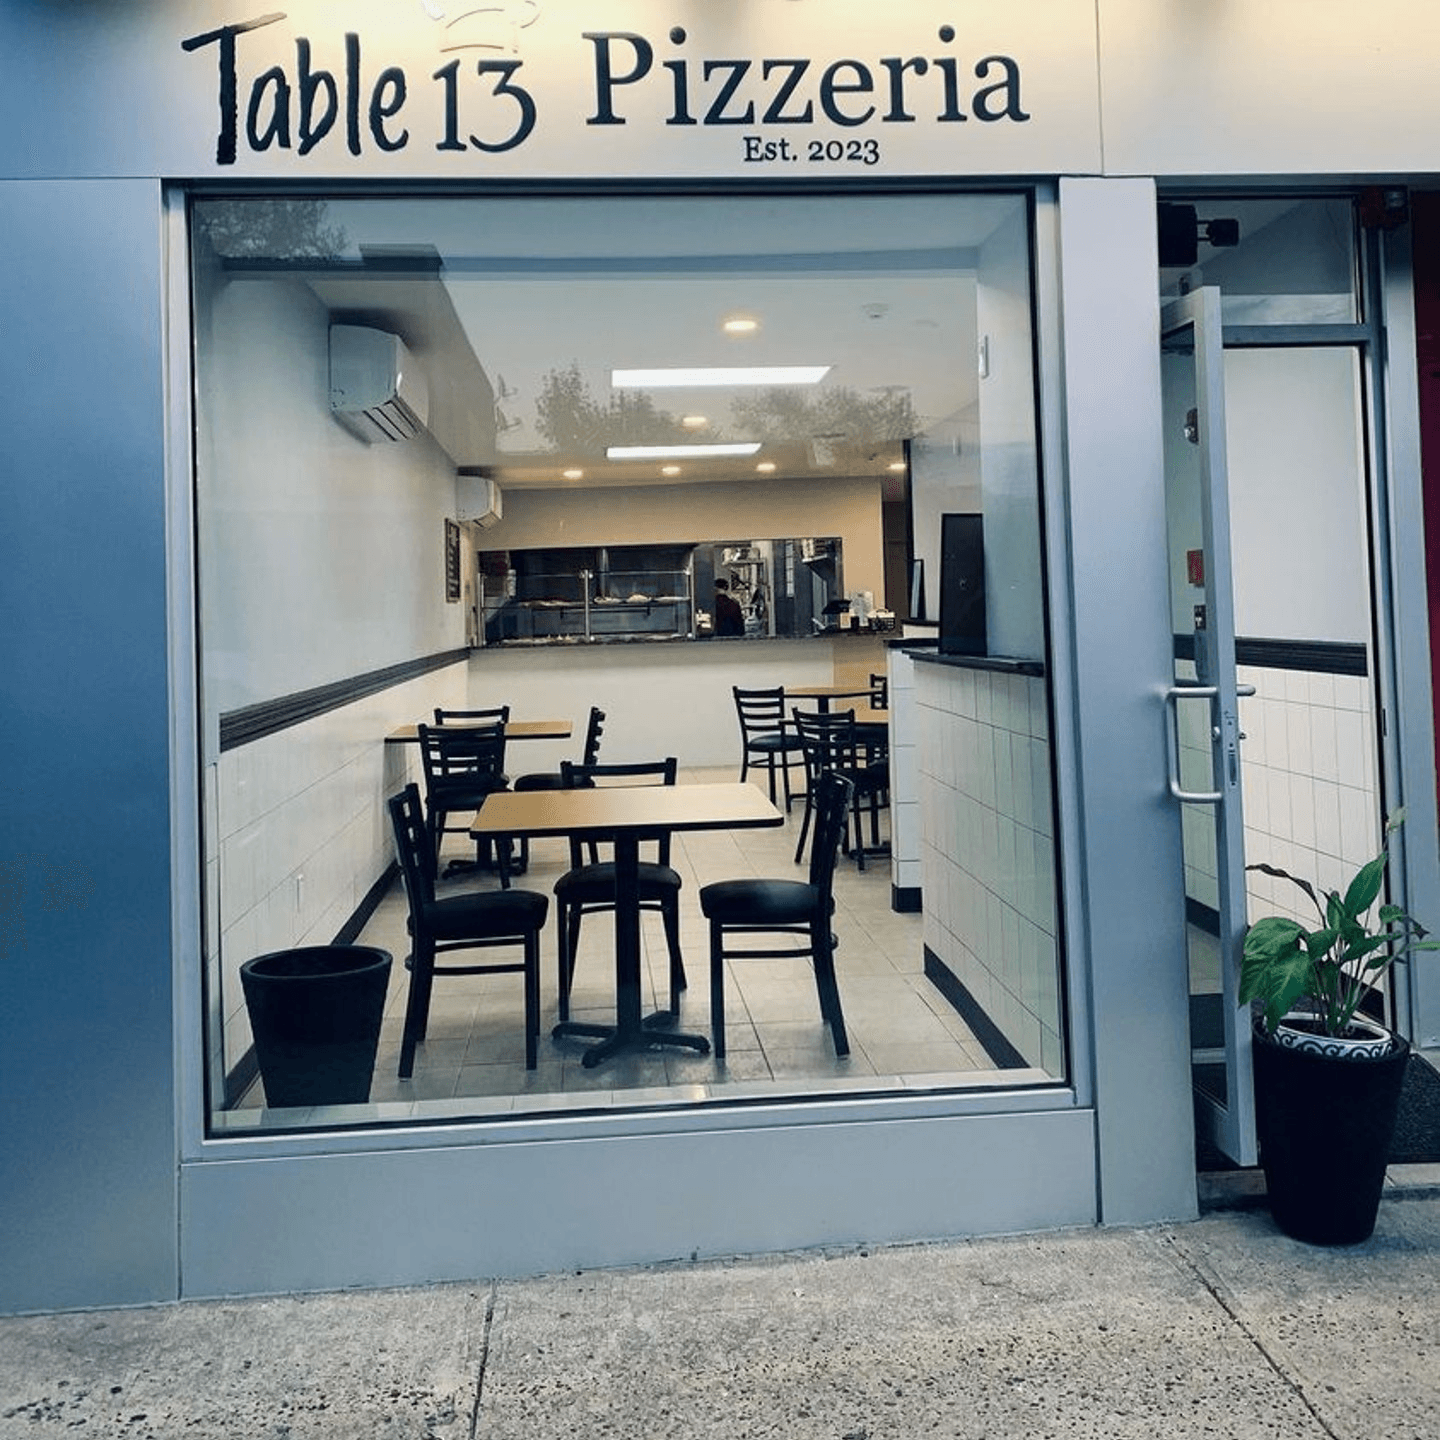 Crafting Culinary Magic at Table 13 Pizzeria